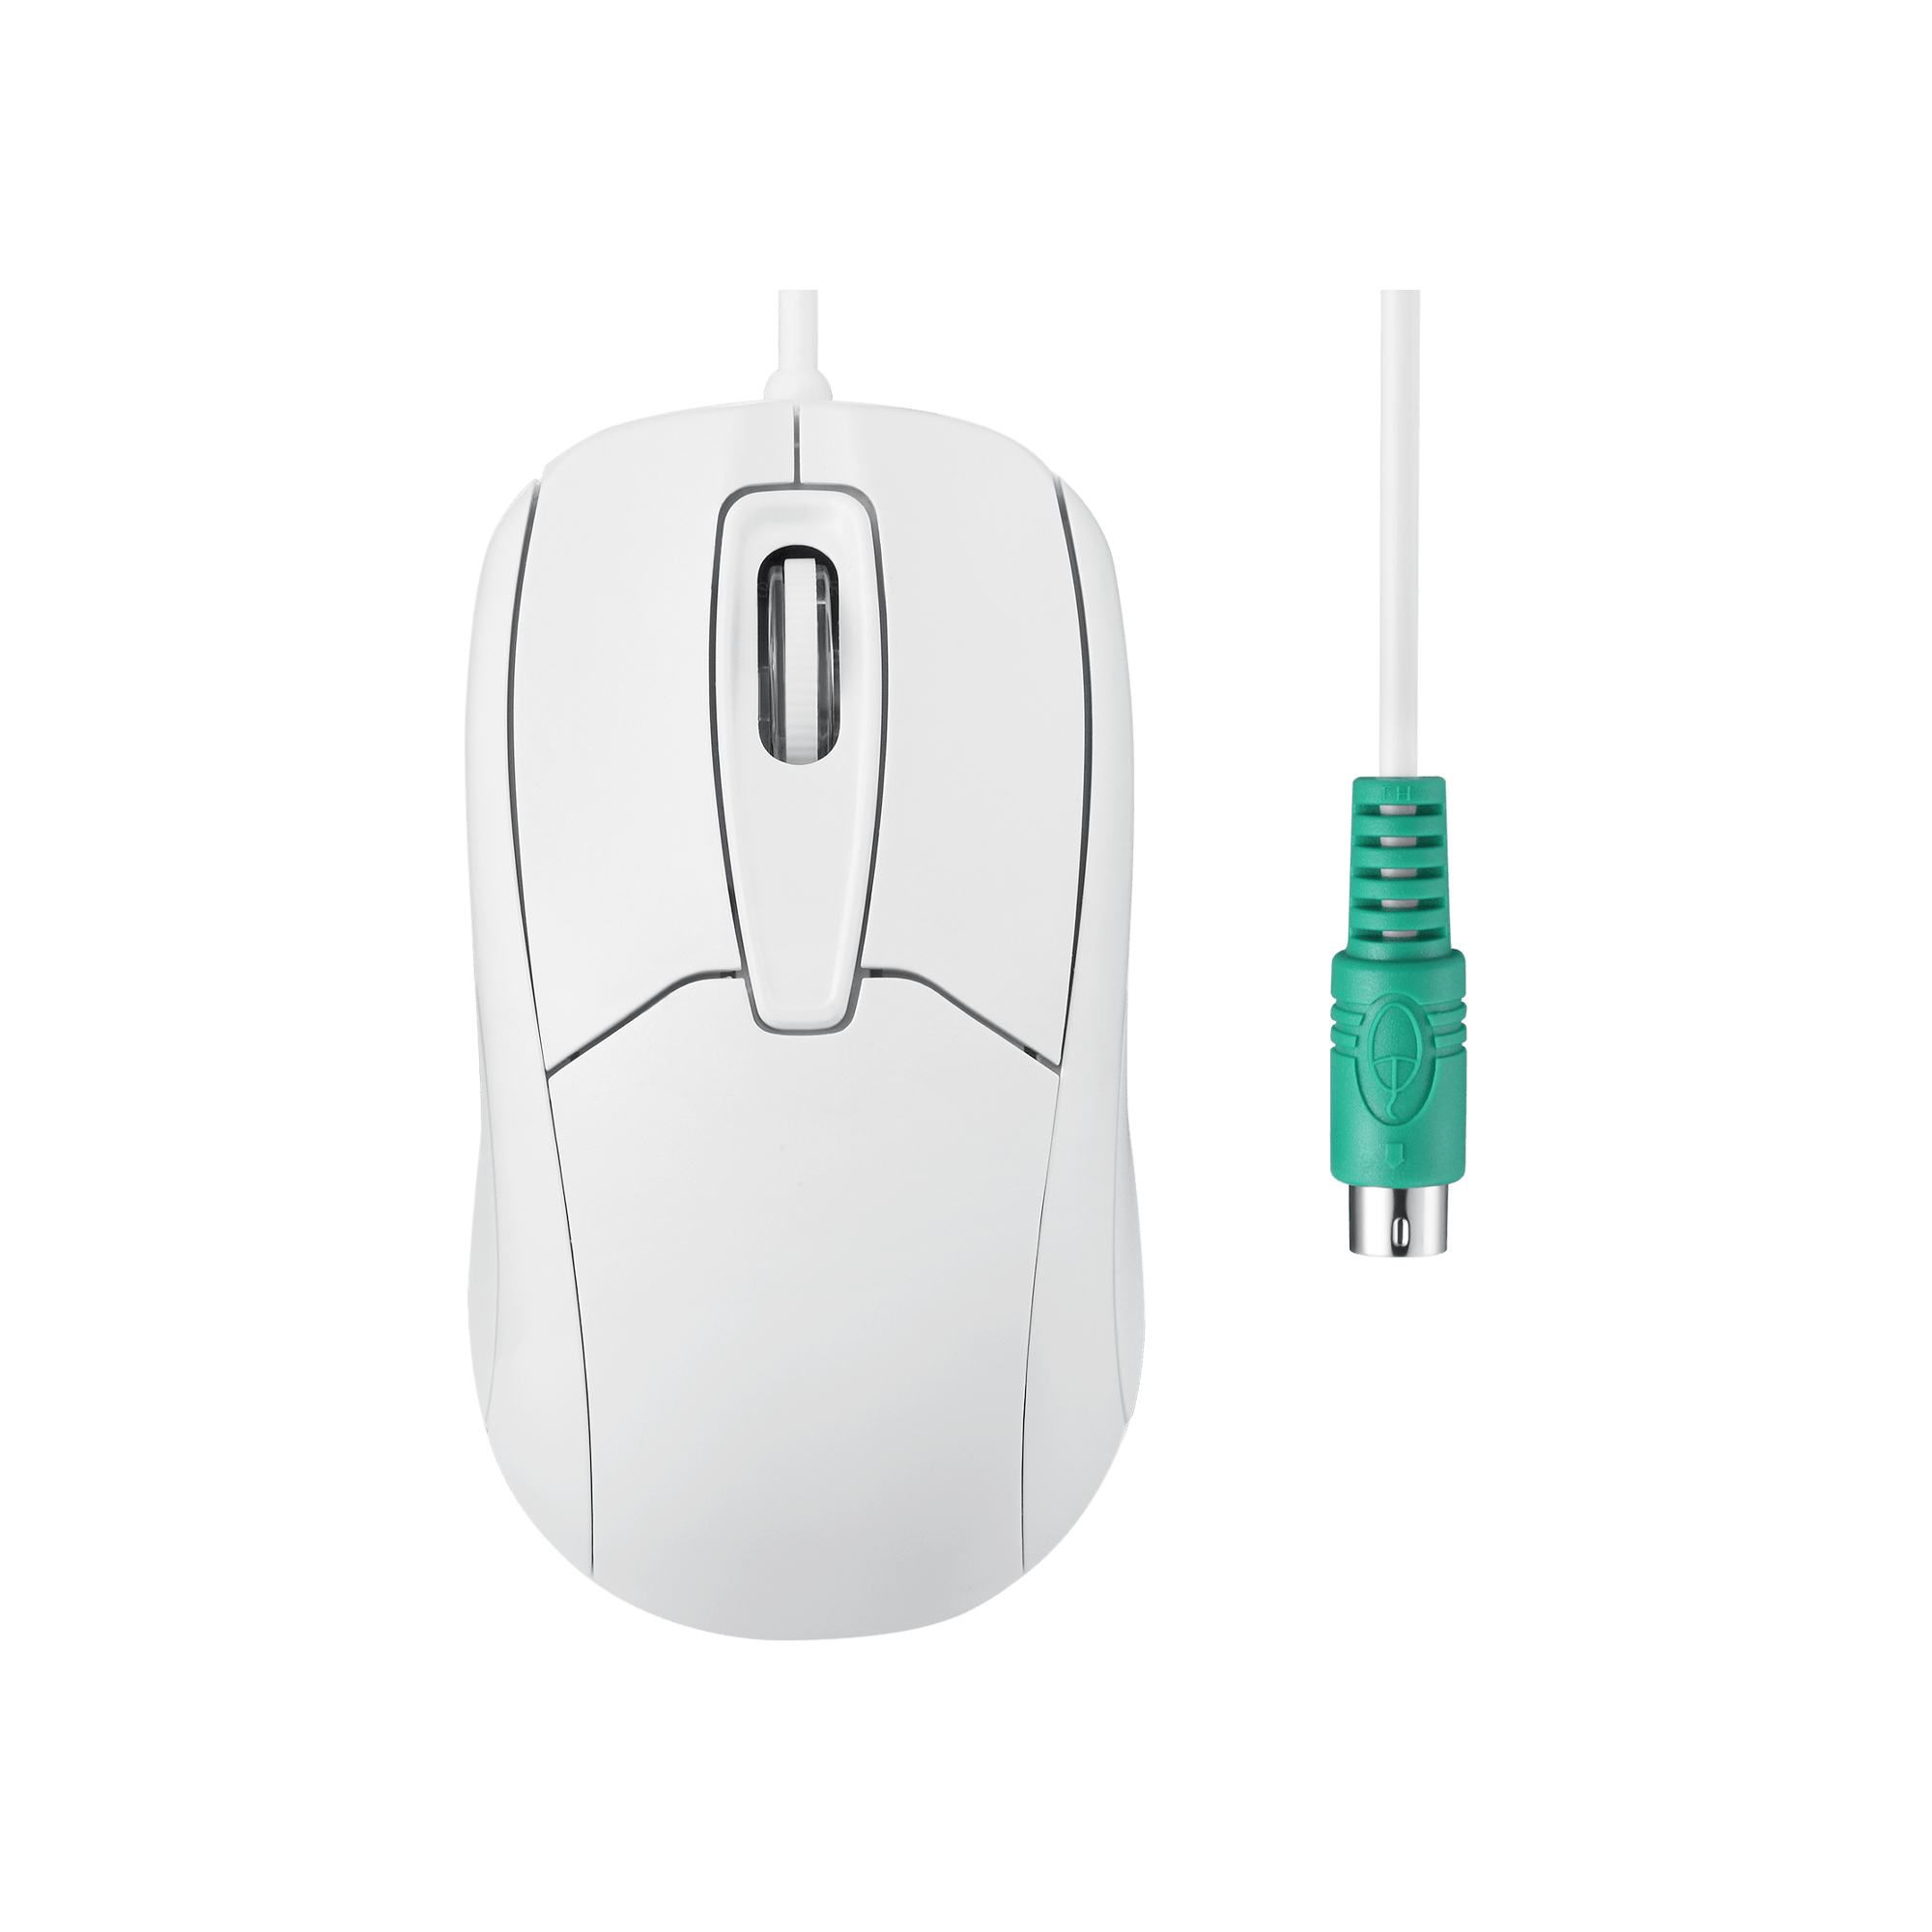 PERIMICE-209 W P - Wired White PS/2 Mouse - Perixx Europe